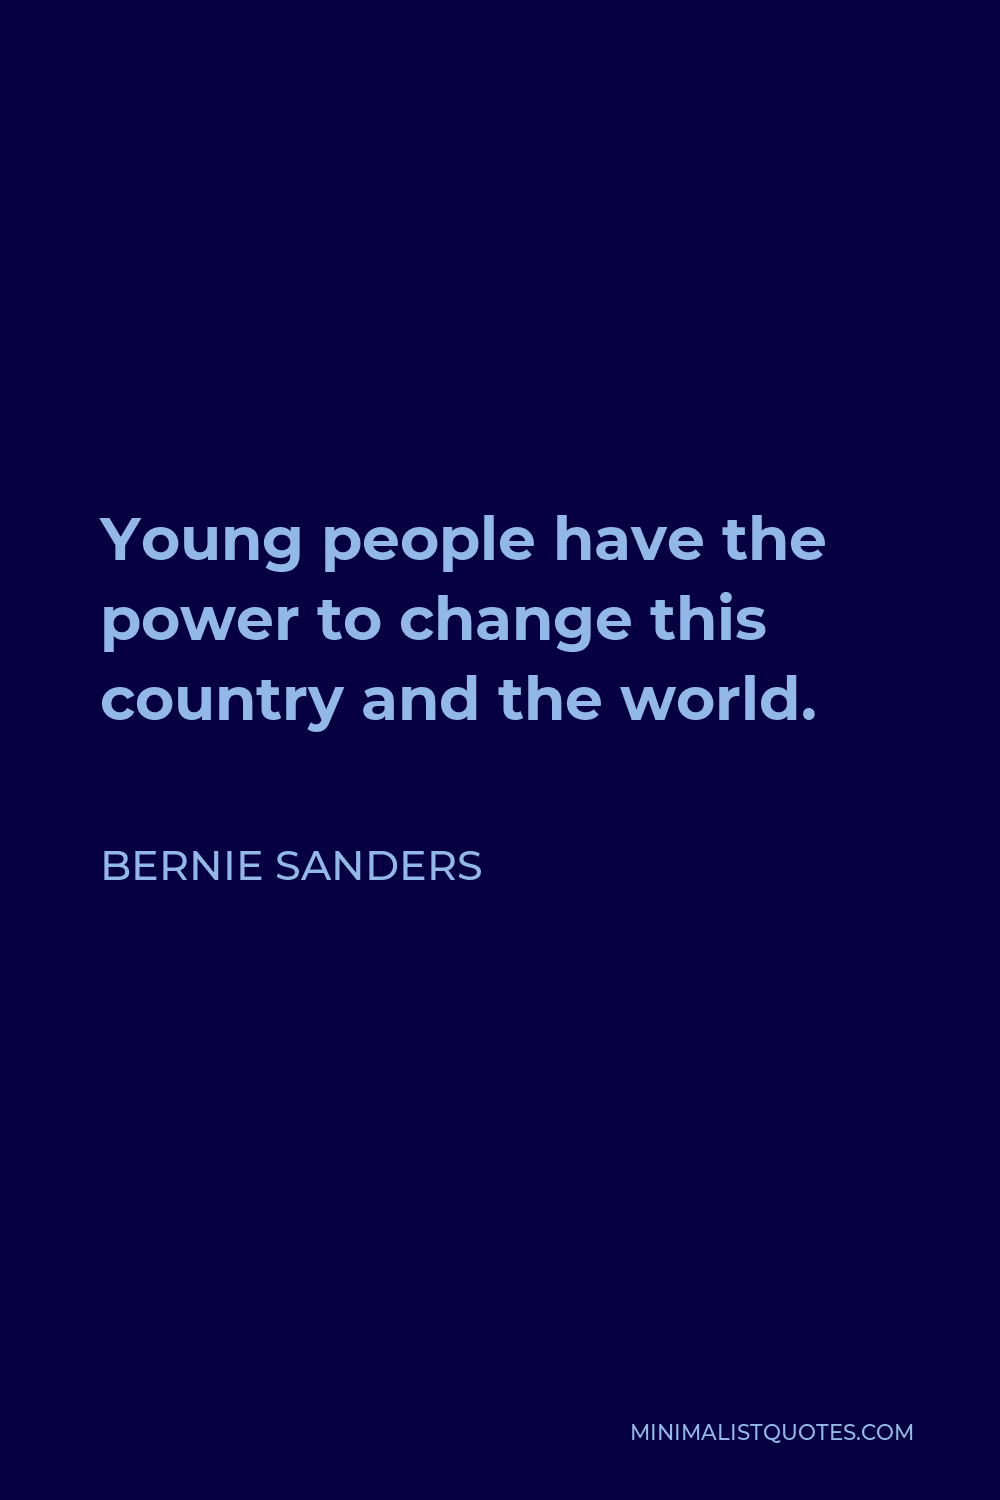 Bernie Sanders Quote - Young people have the power to change this country and the world.